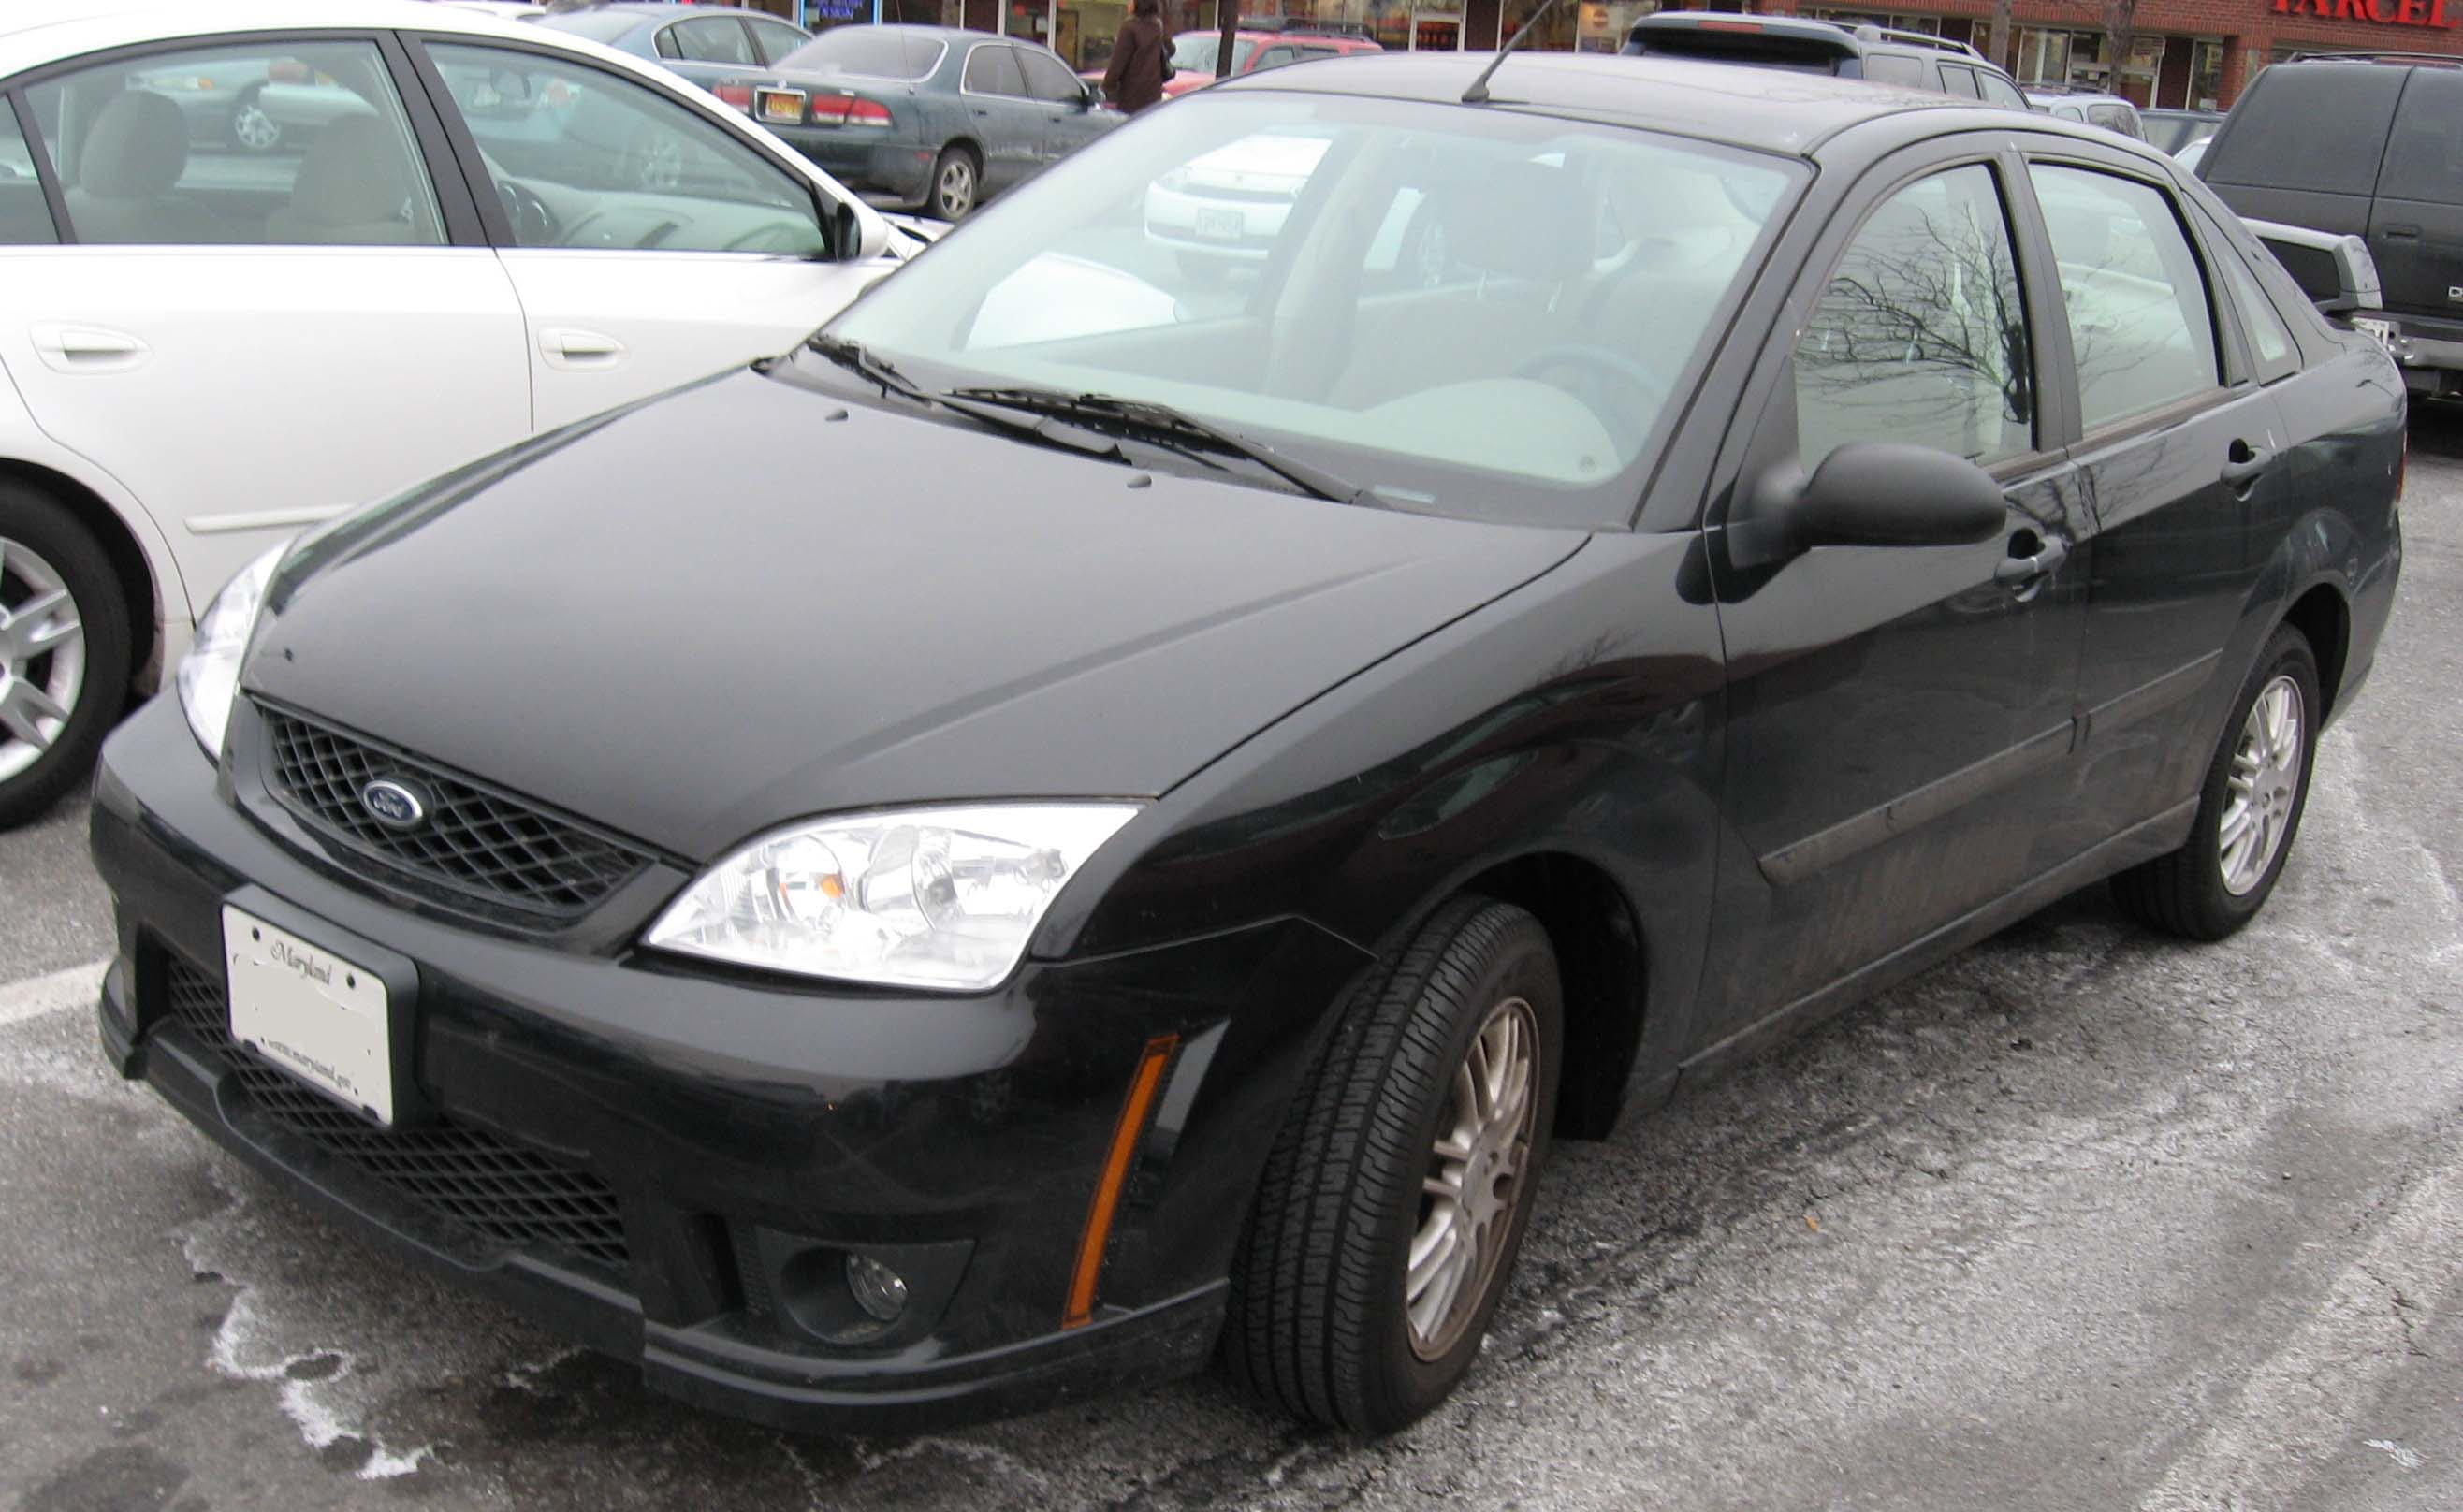 File:2007-Ford-Focus-SE-Appearance.jpg - Wikimedia Commons